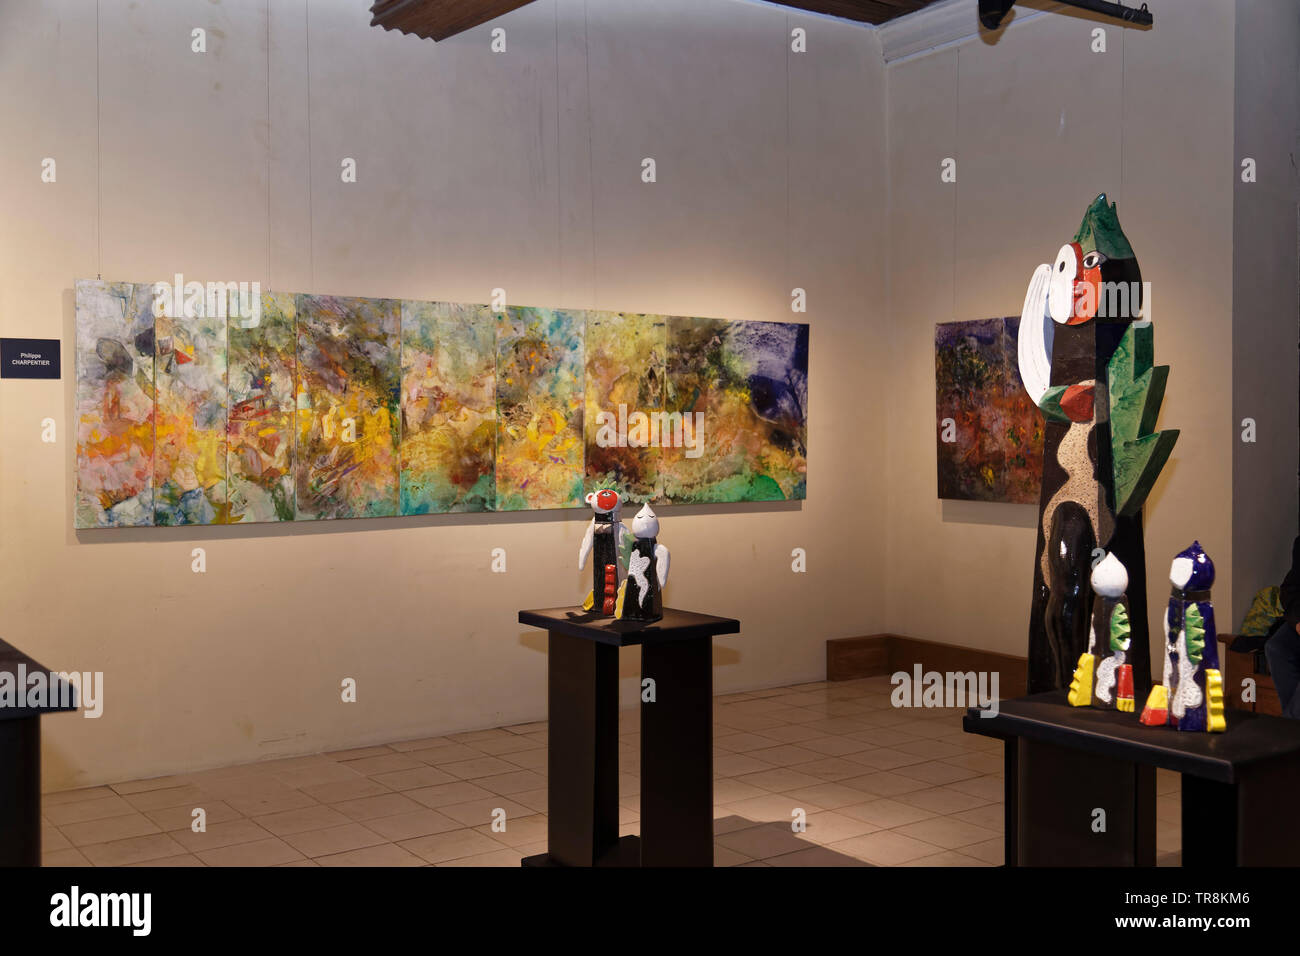 Tours, France.24th May,2019.Artworks of Coville & P. Charpentier at Exhibition Re-naissance(s) of the Capazza Gallery. ©:V Phitoussi/Alamy Stock Photo Stock Photo